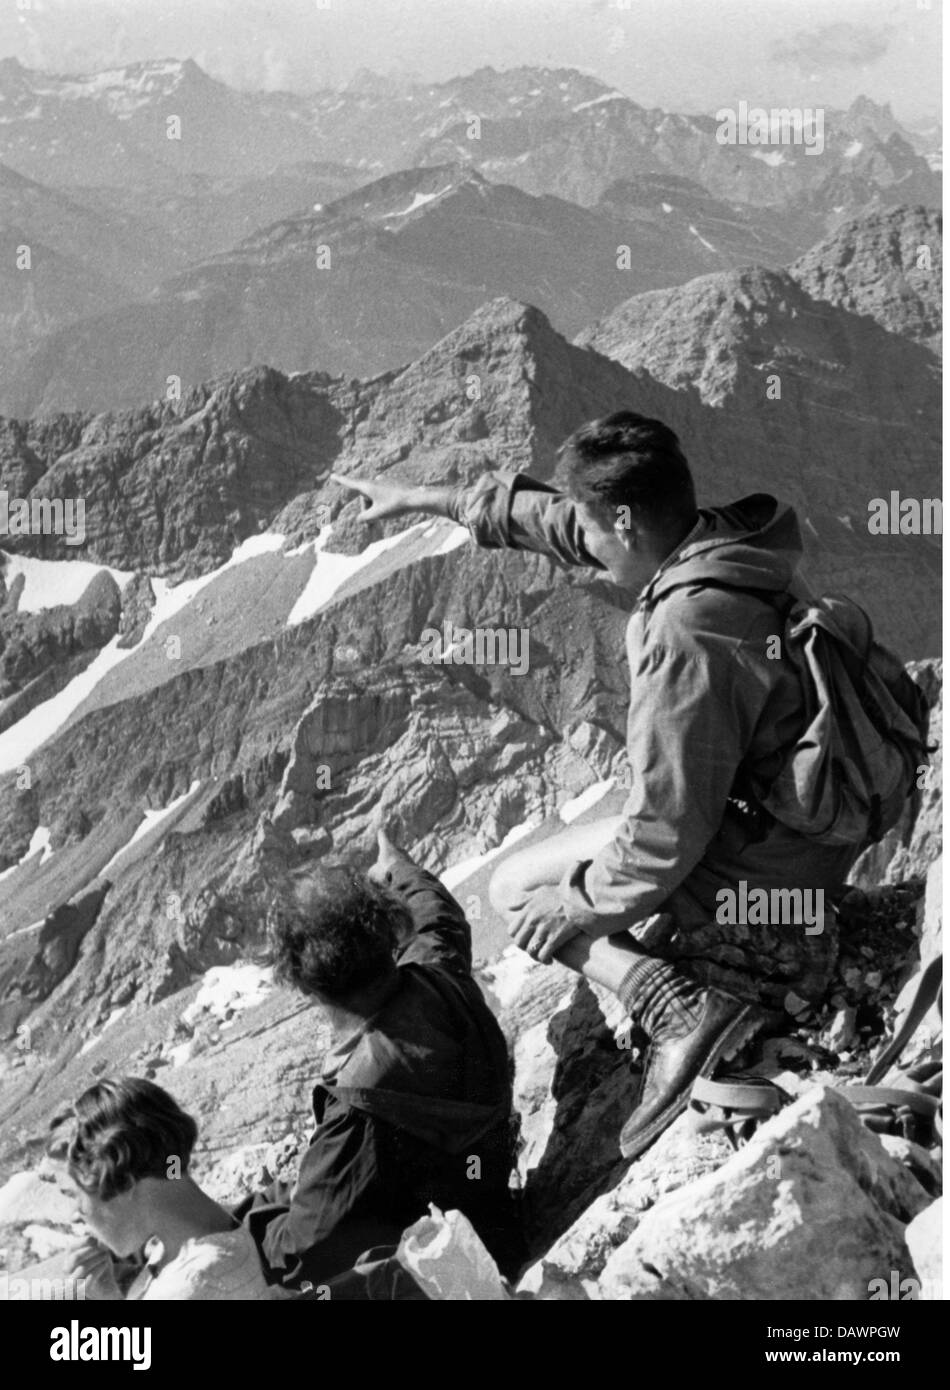 1950s hiker Black and White Stock Photos & Images - Alamy